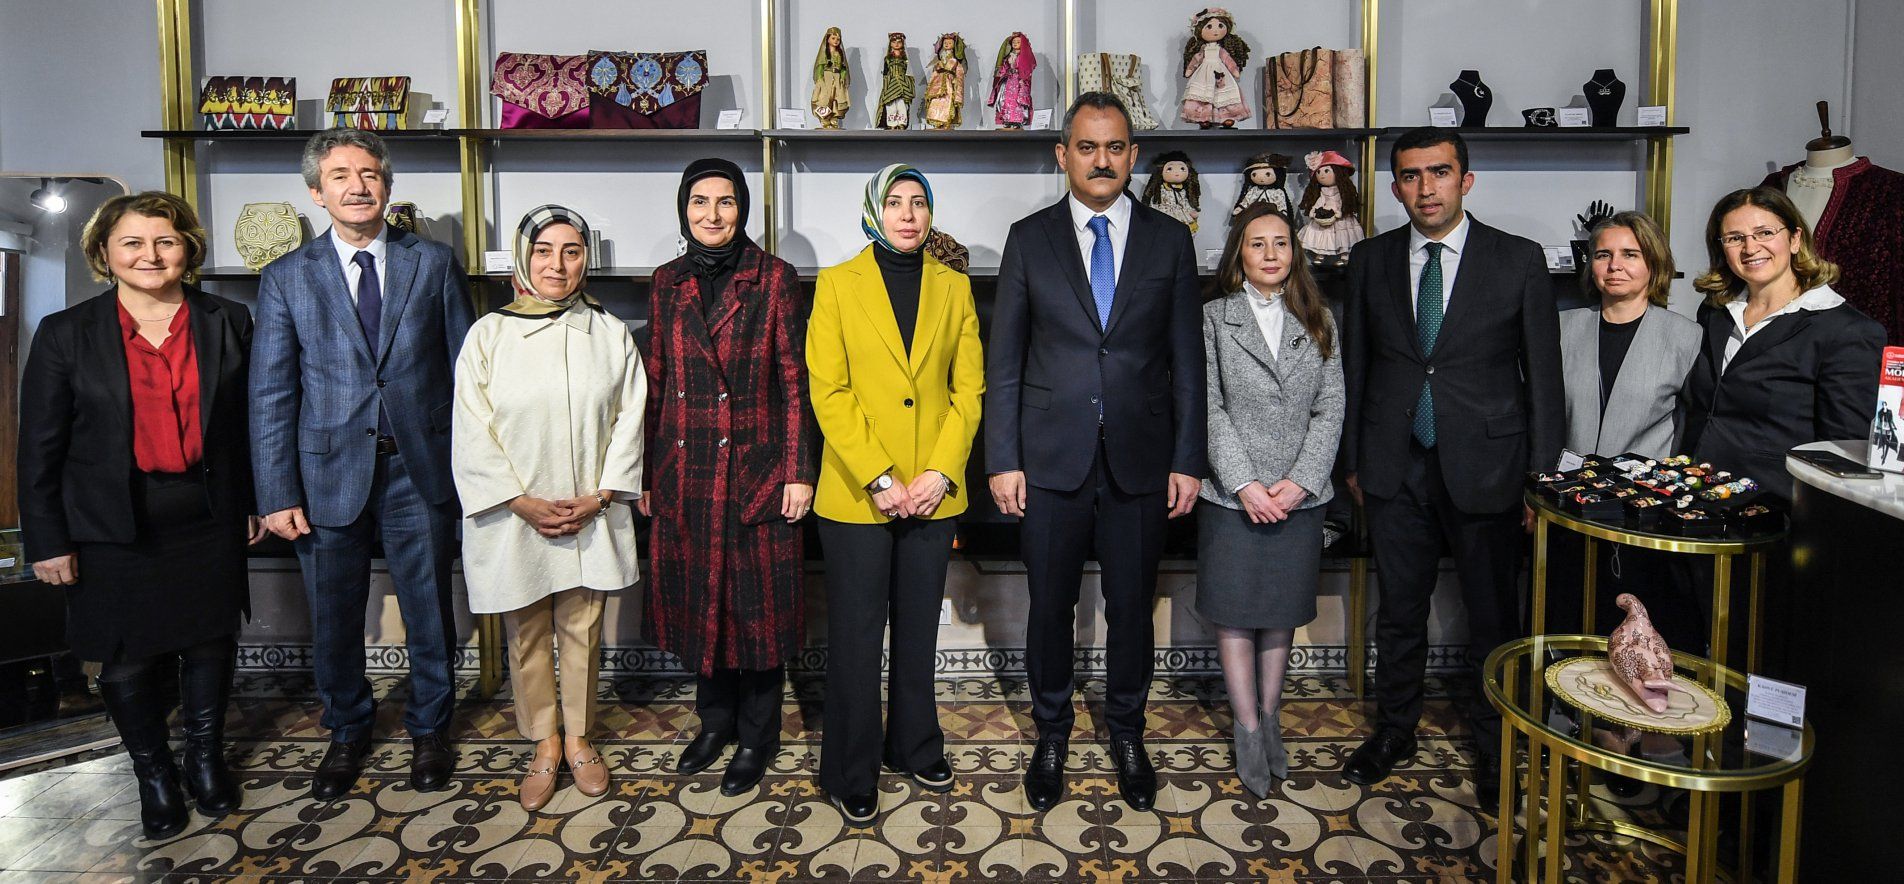 MINISTER ÖZER VISITS THE FIRST FASHION ACADEMY OF MEB